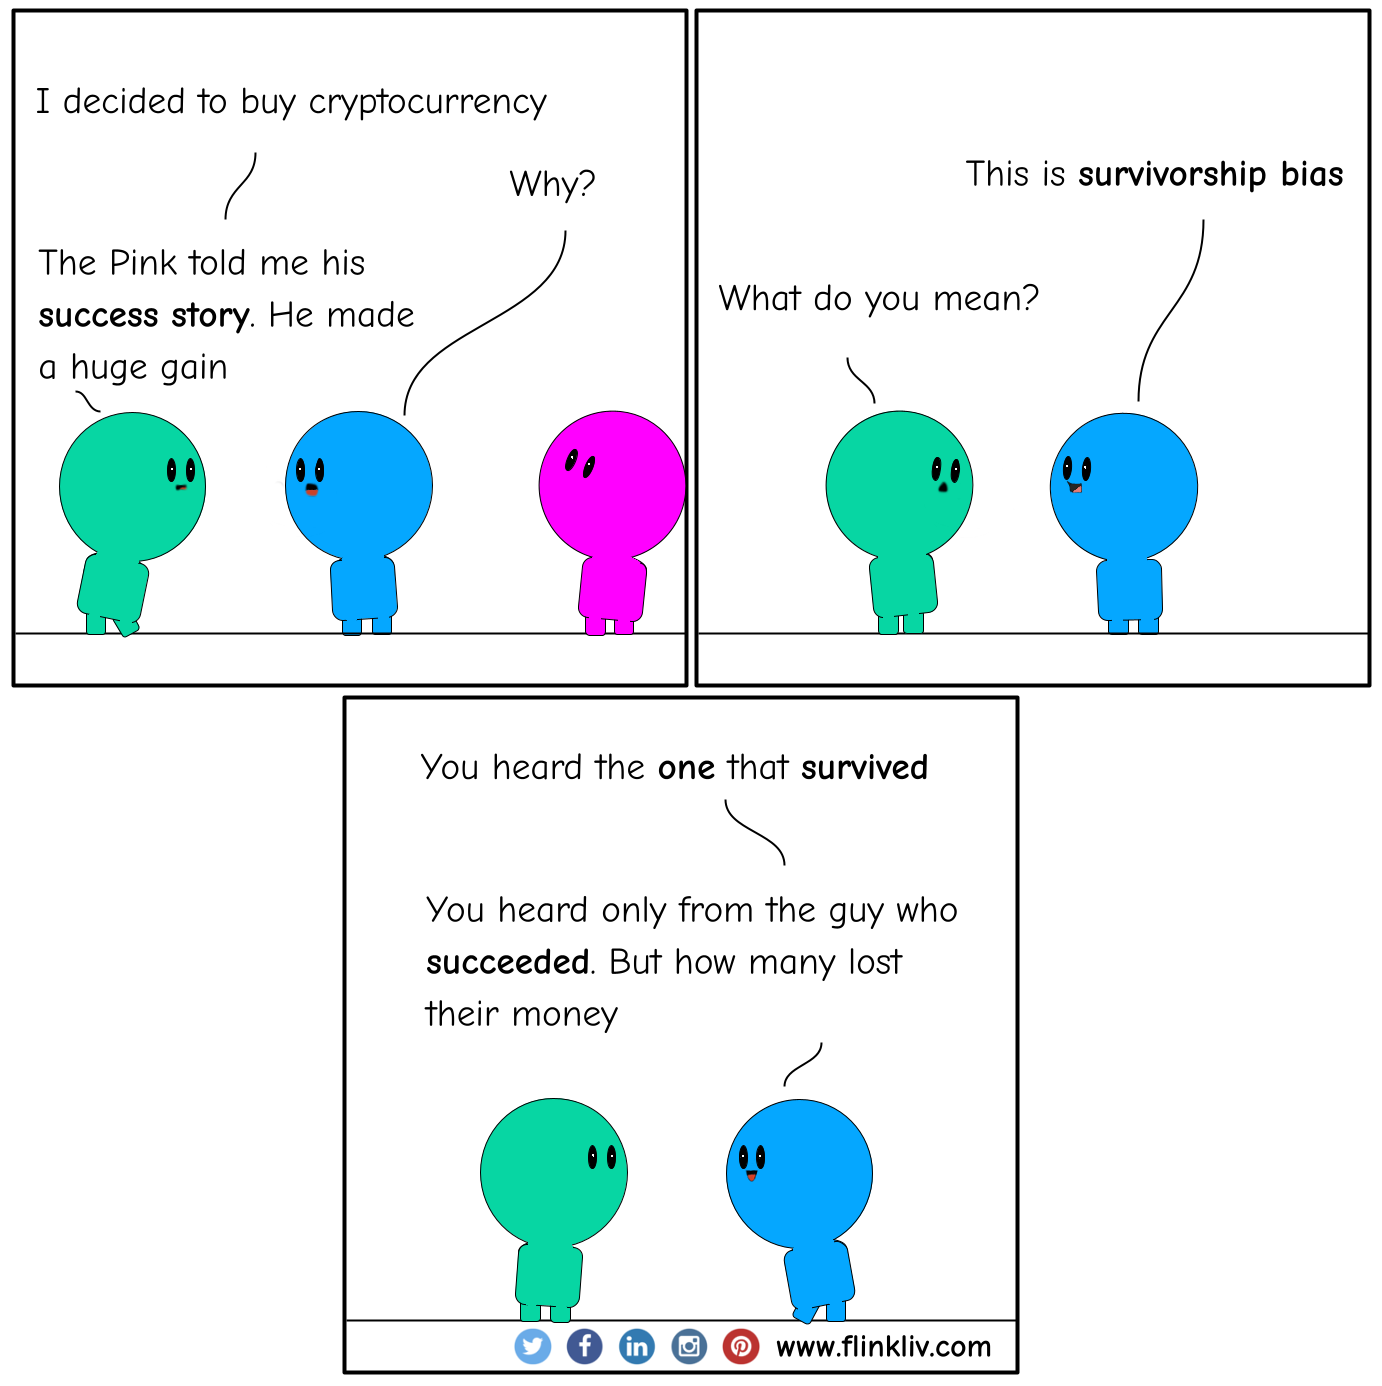 Conversation between A and B about survivorship bias. A: I decided to buy cryptocurrency B: Why? A: The Pink told me his success story. He made a huge gain B: This is survivorship bias A: What do you mean? B: You heard the one that survived. You heard only from the guy who succeeded. But how many lost their money.
				By Flinkliv.com